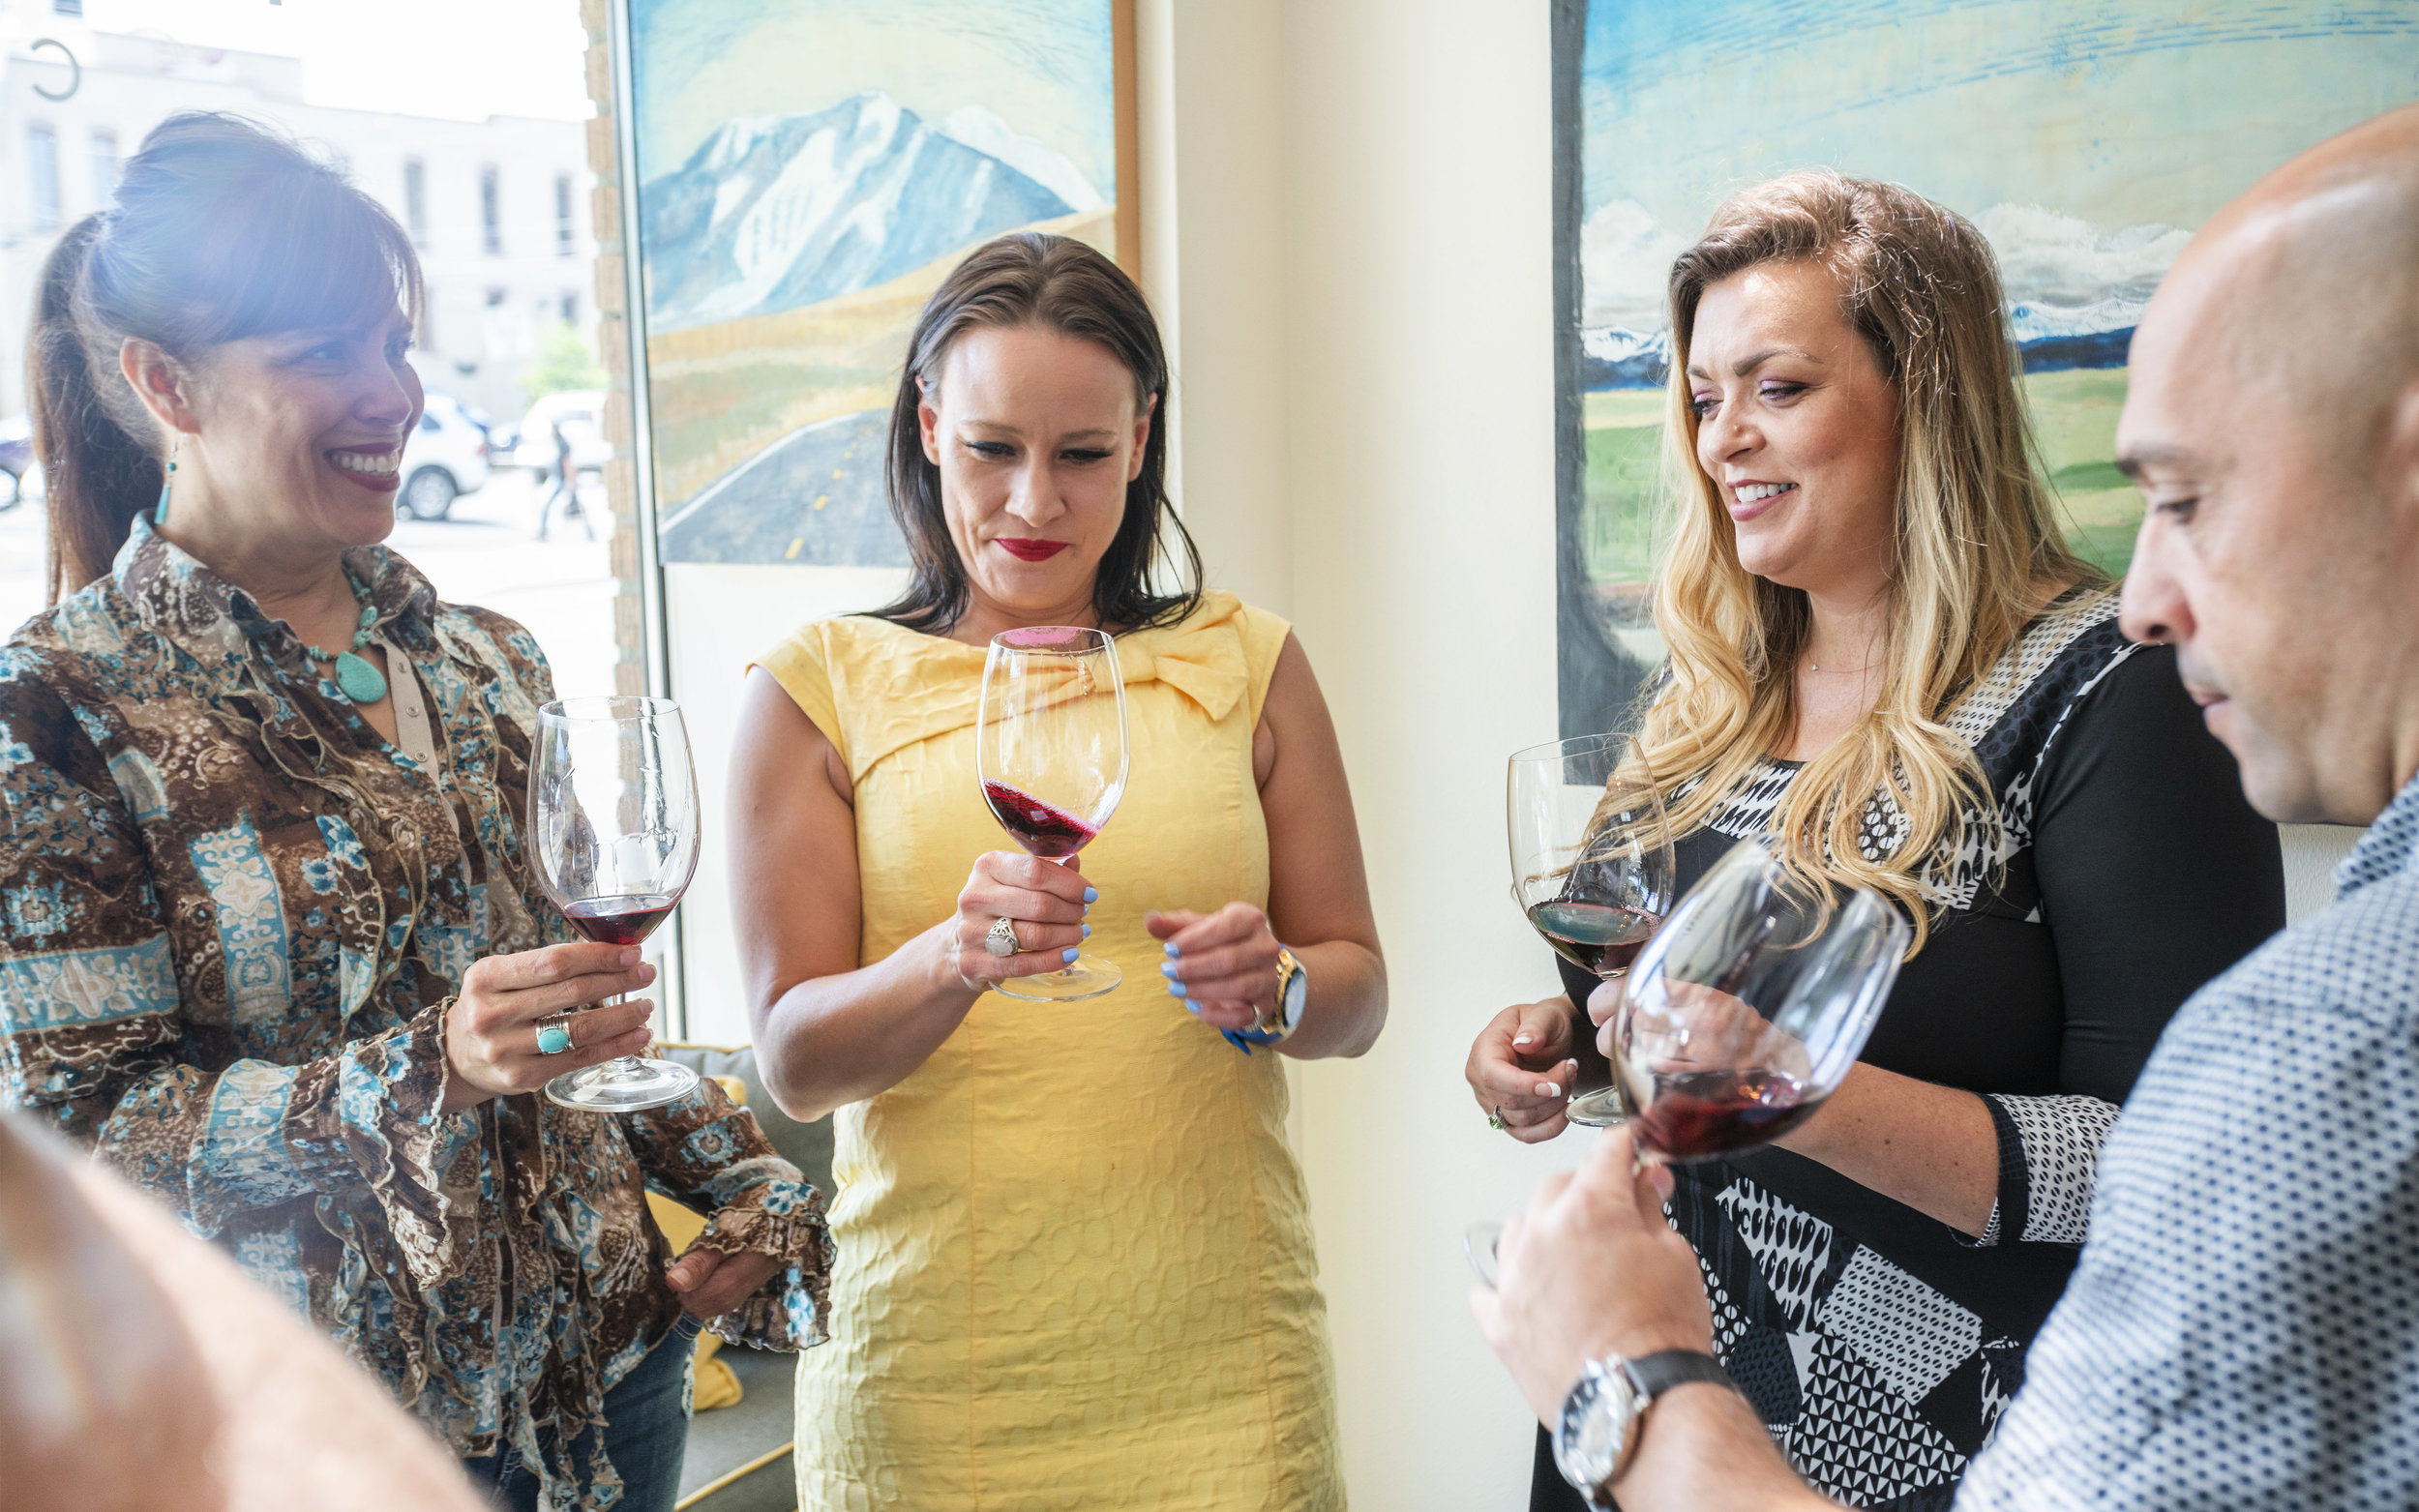 Guests at the Mansion Creek Cellars tasting room in Walla Walla Washington swirl the wine in their glasses.